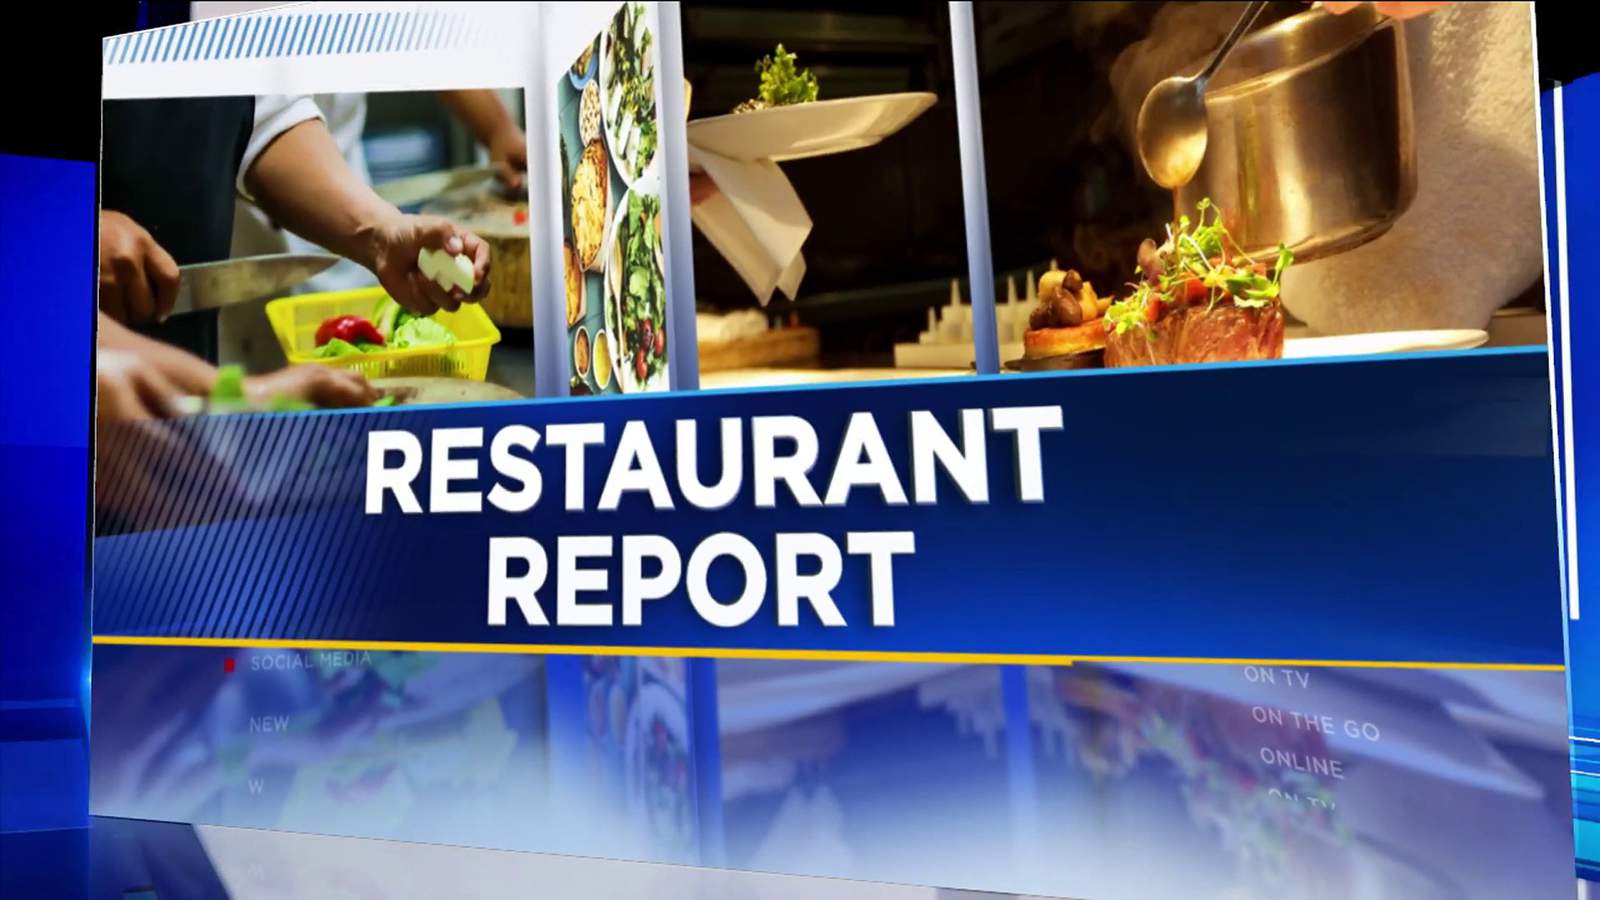 War of the roaches: Emergency shutdown persists for restaurant with bug problem